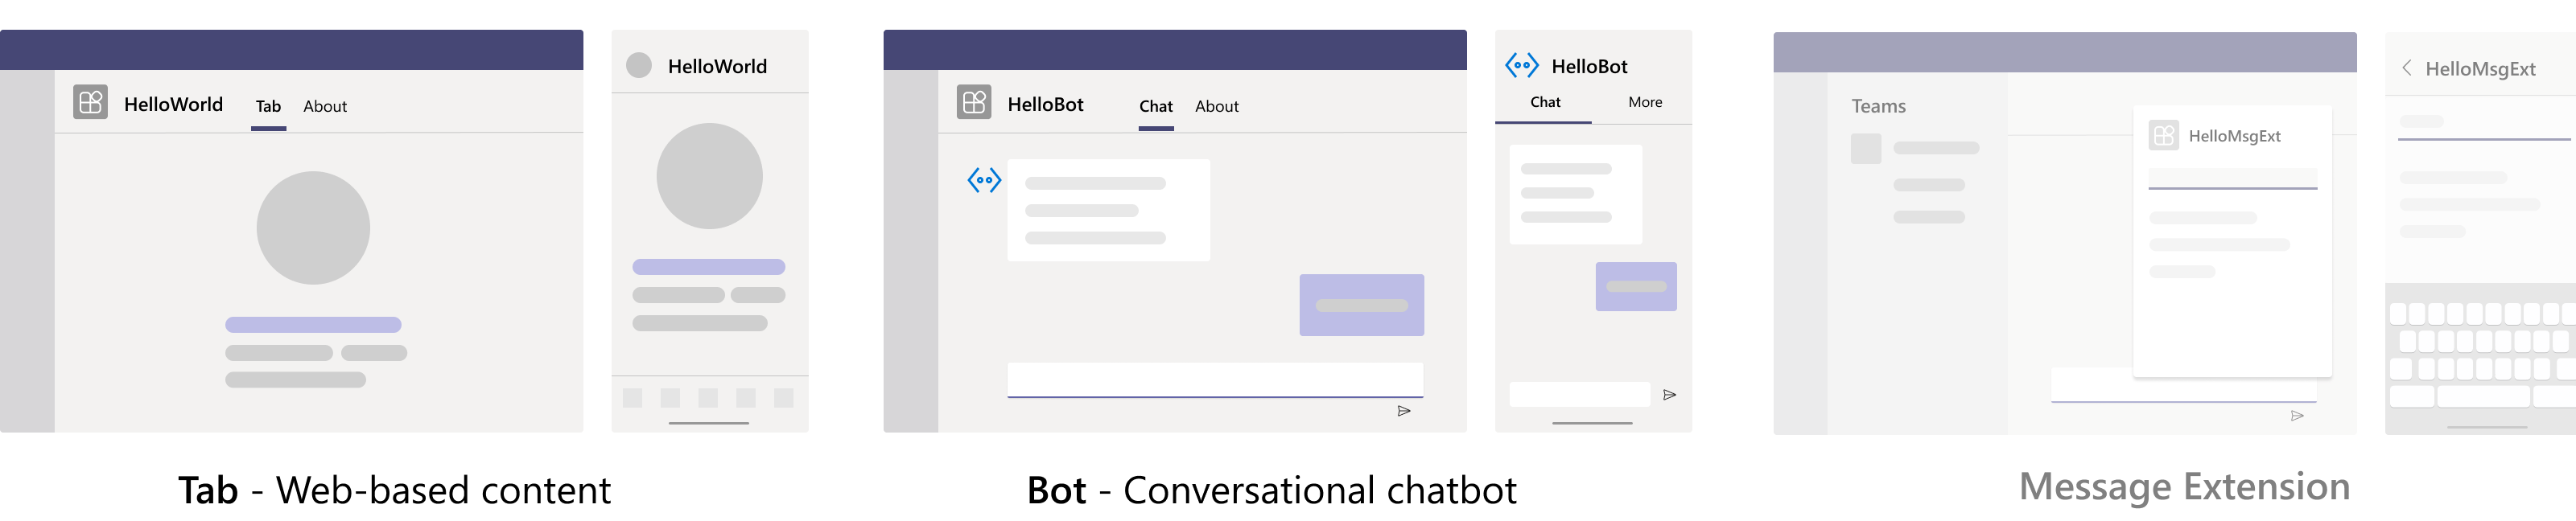 Screenshot of the blazor app displaying the tab, Bot, and Message Extension output after the step-by-step Blazor guide is successfully completed.